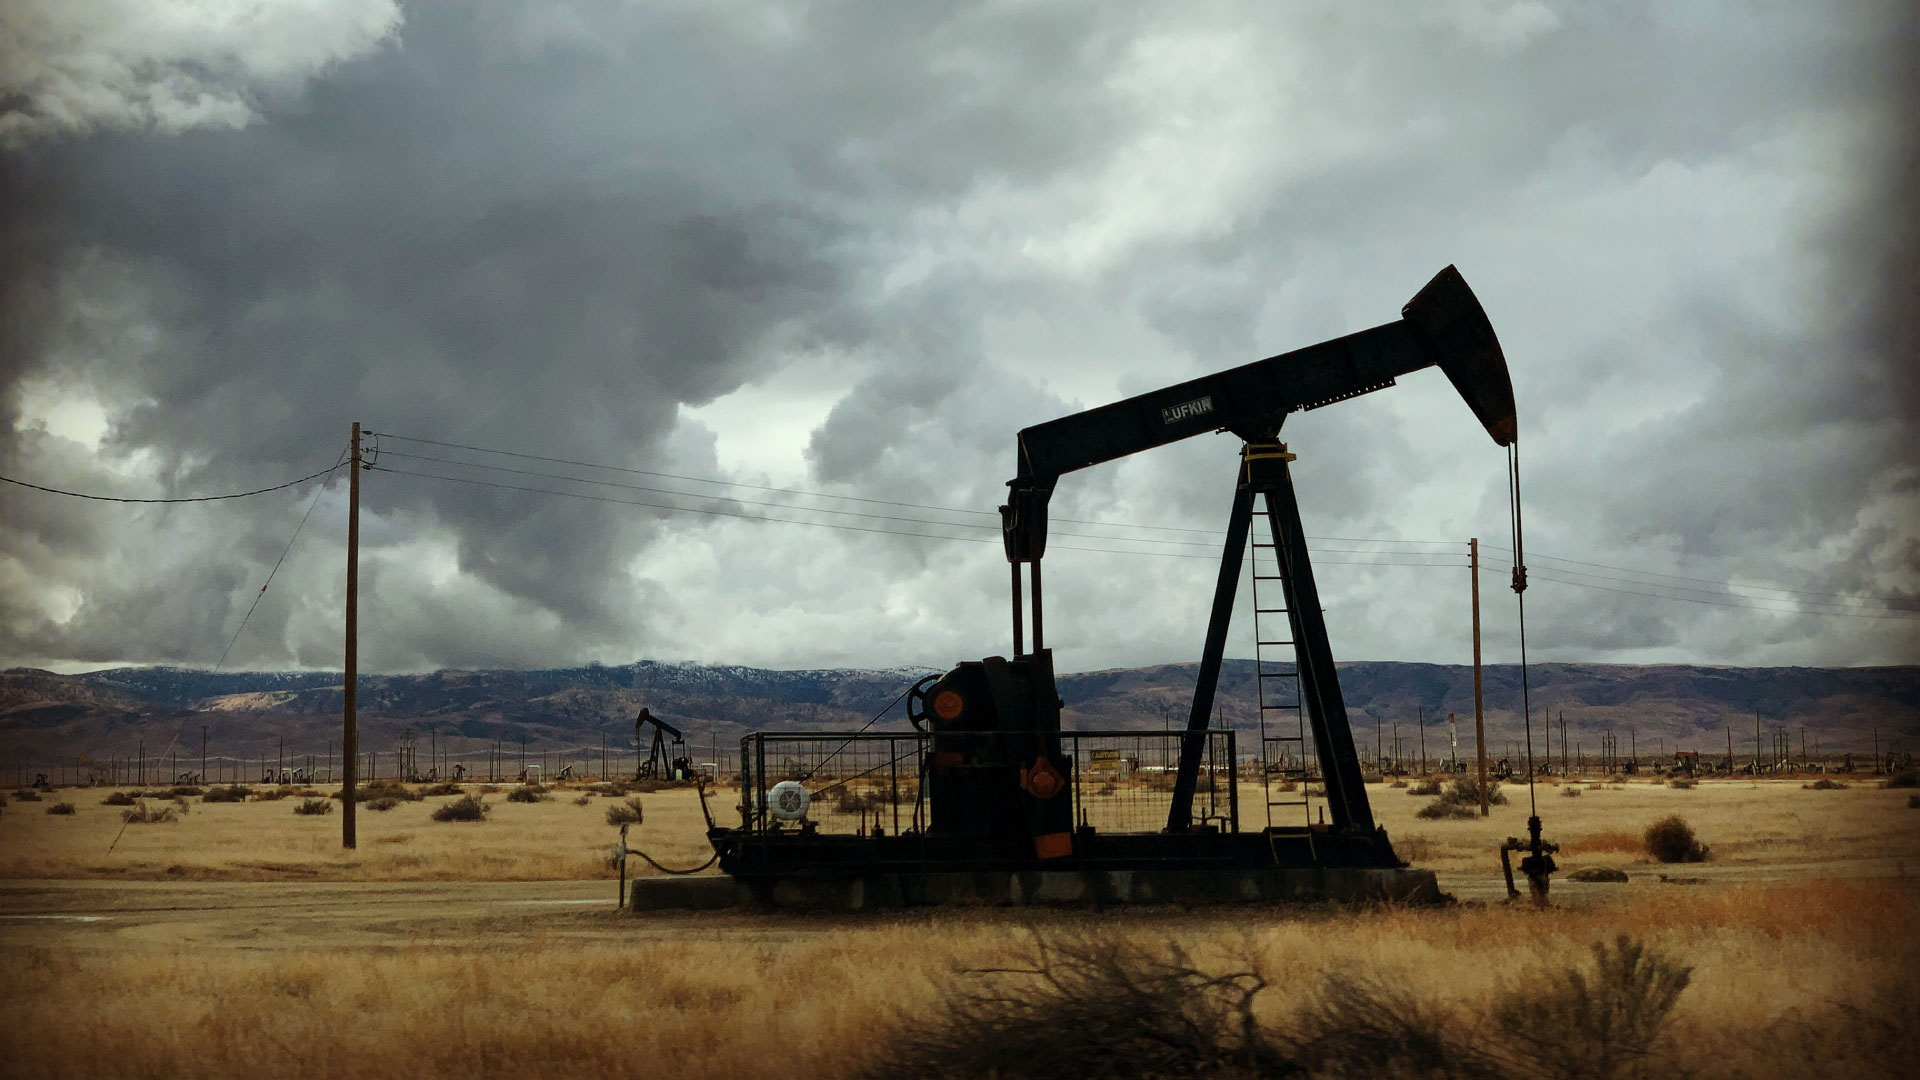 Oil well in field with storm clouds in the background